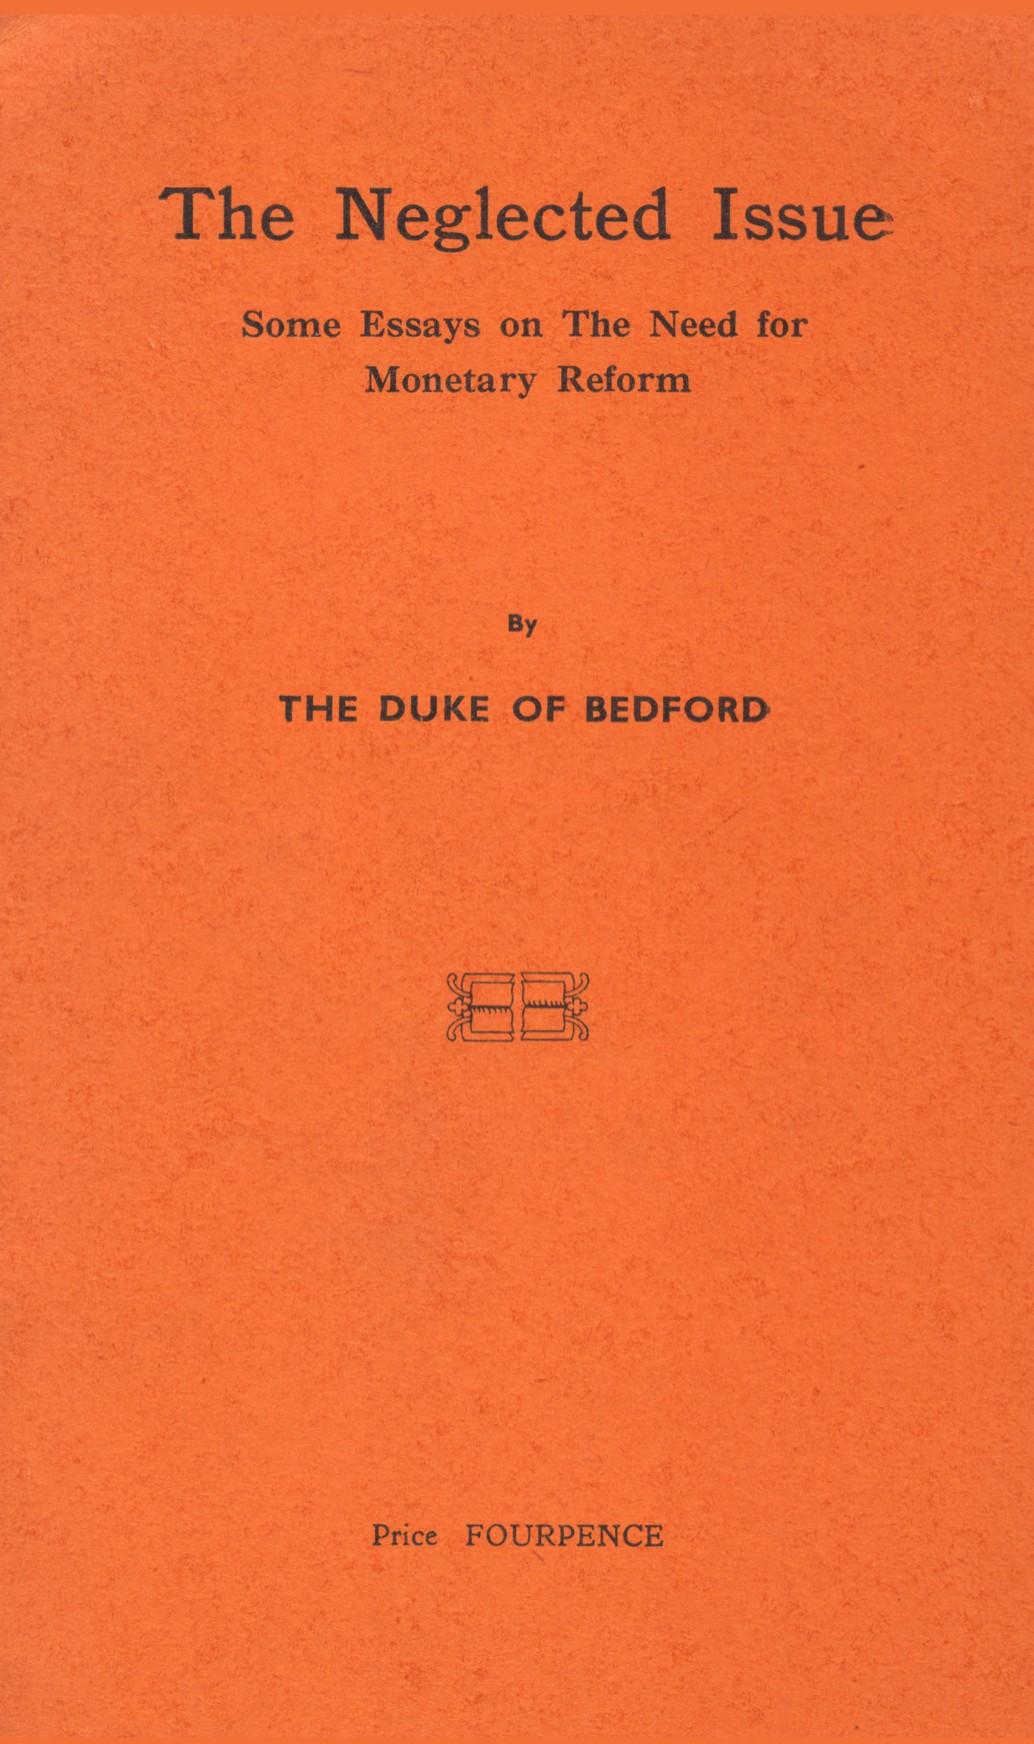 The Neglected Issue: Some Essays on The Need for Monetary Reform (1944) by The Duke of Bedford